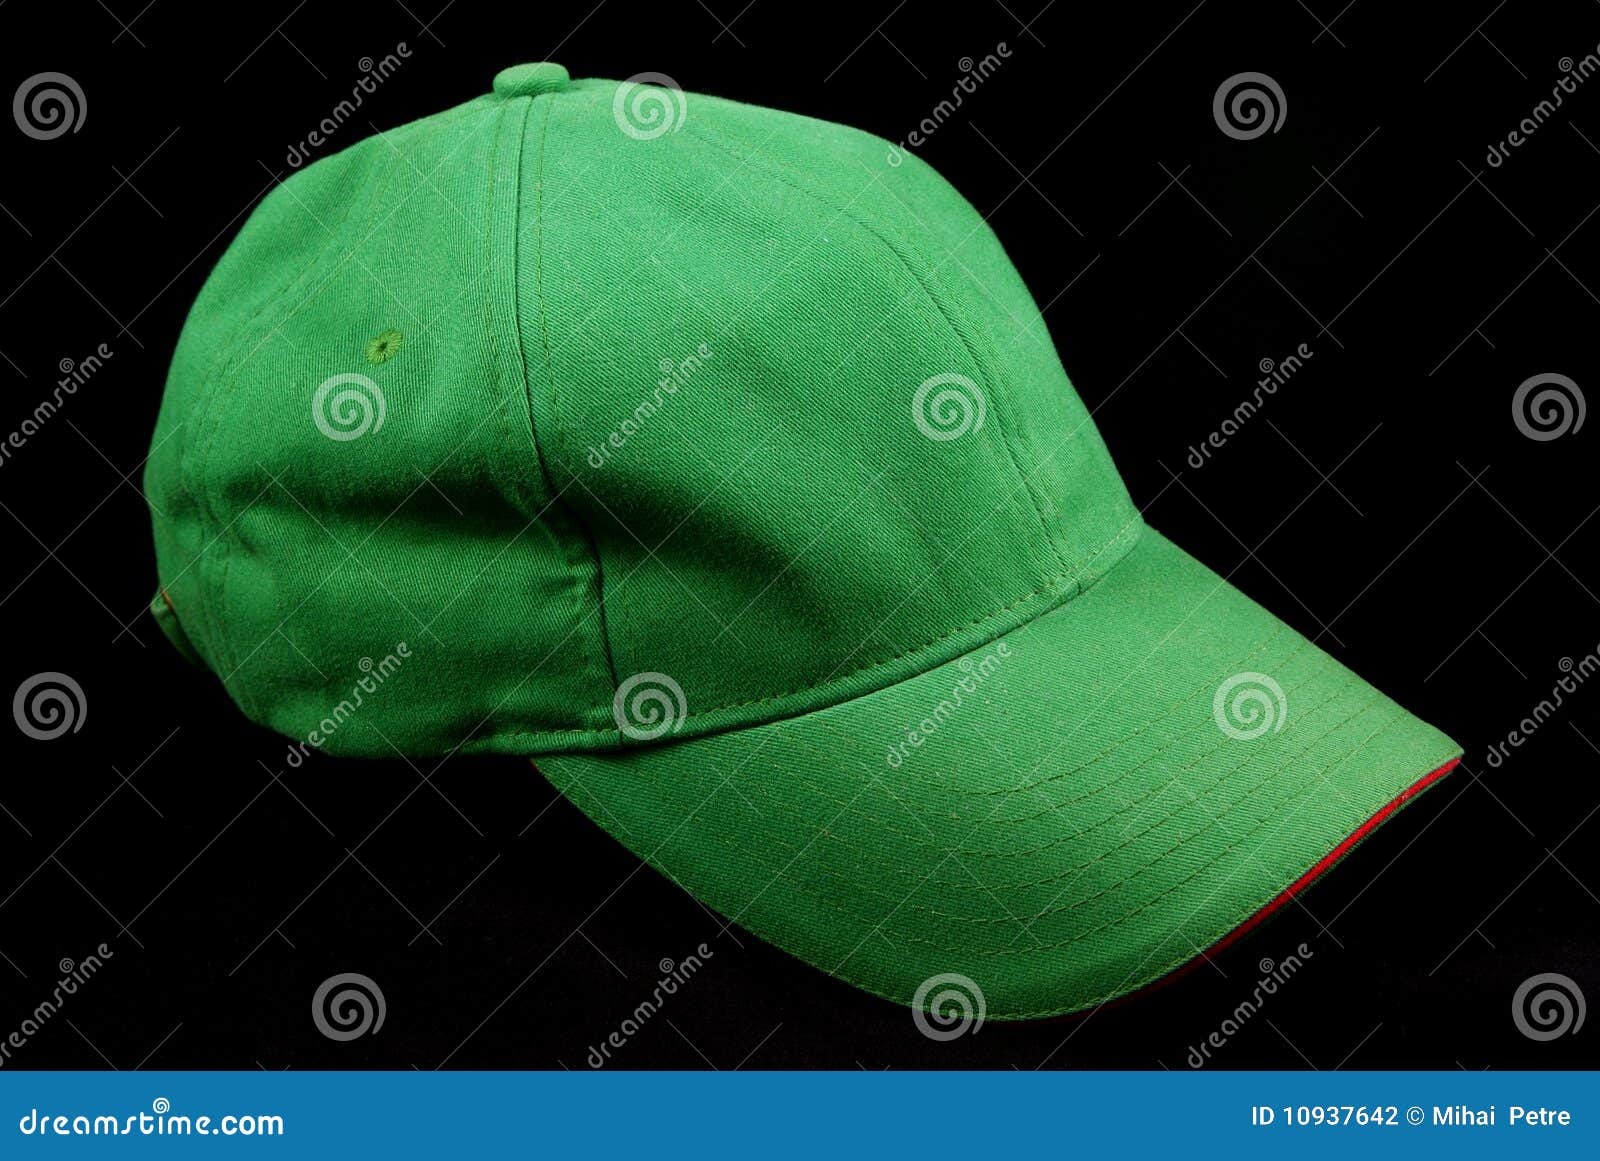 Green sports cap stock photo. Image of textile, gear - 10937642